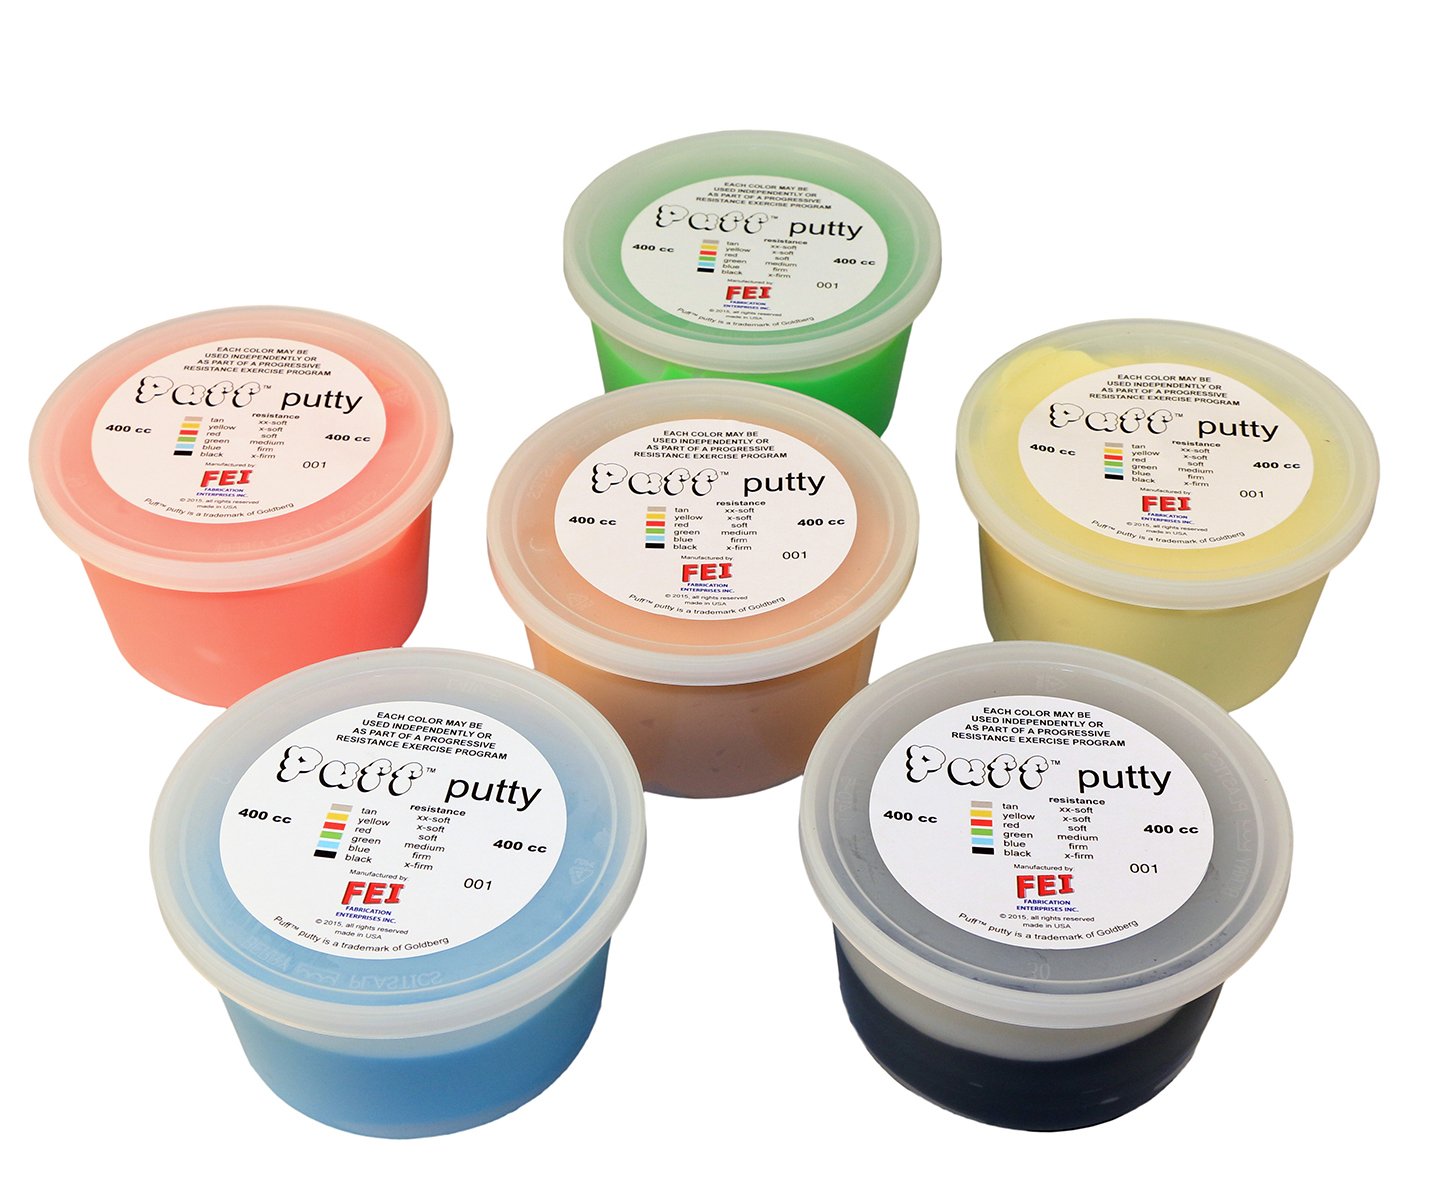 Cando Puff LiTE Exercise Putty, 6 Piece Set (Tan, Yellow, Red, Green, Blue, Black), 13.5 oz